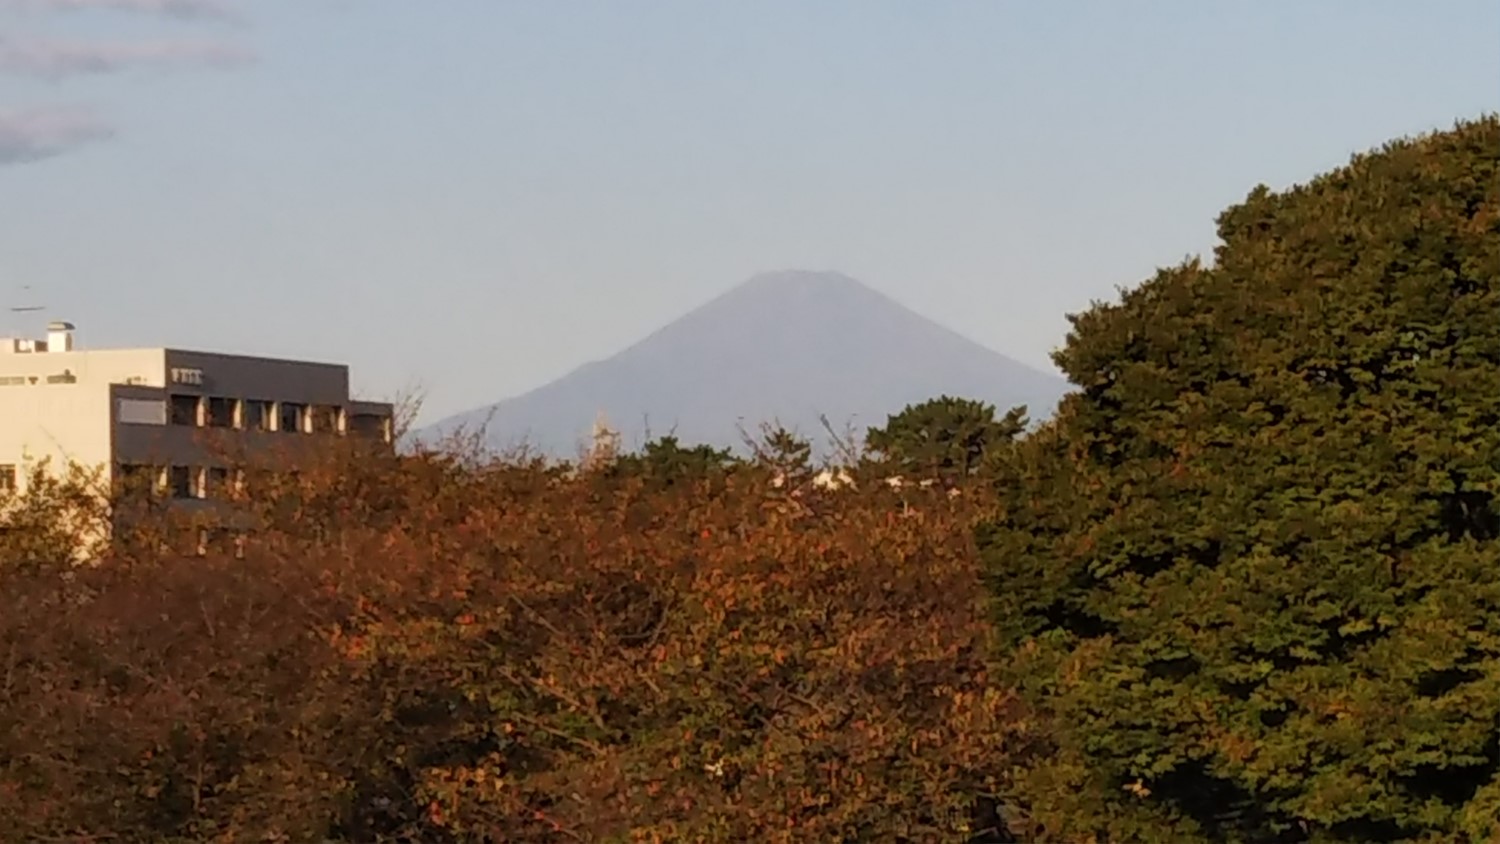 Mt. Fuji the day after a storm